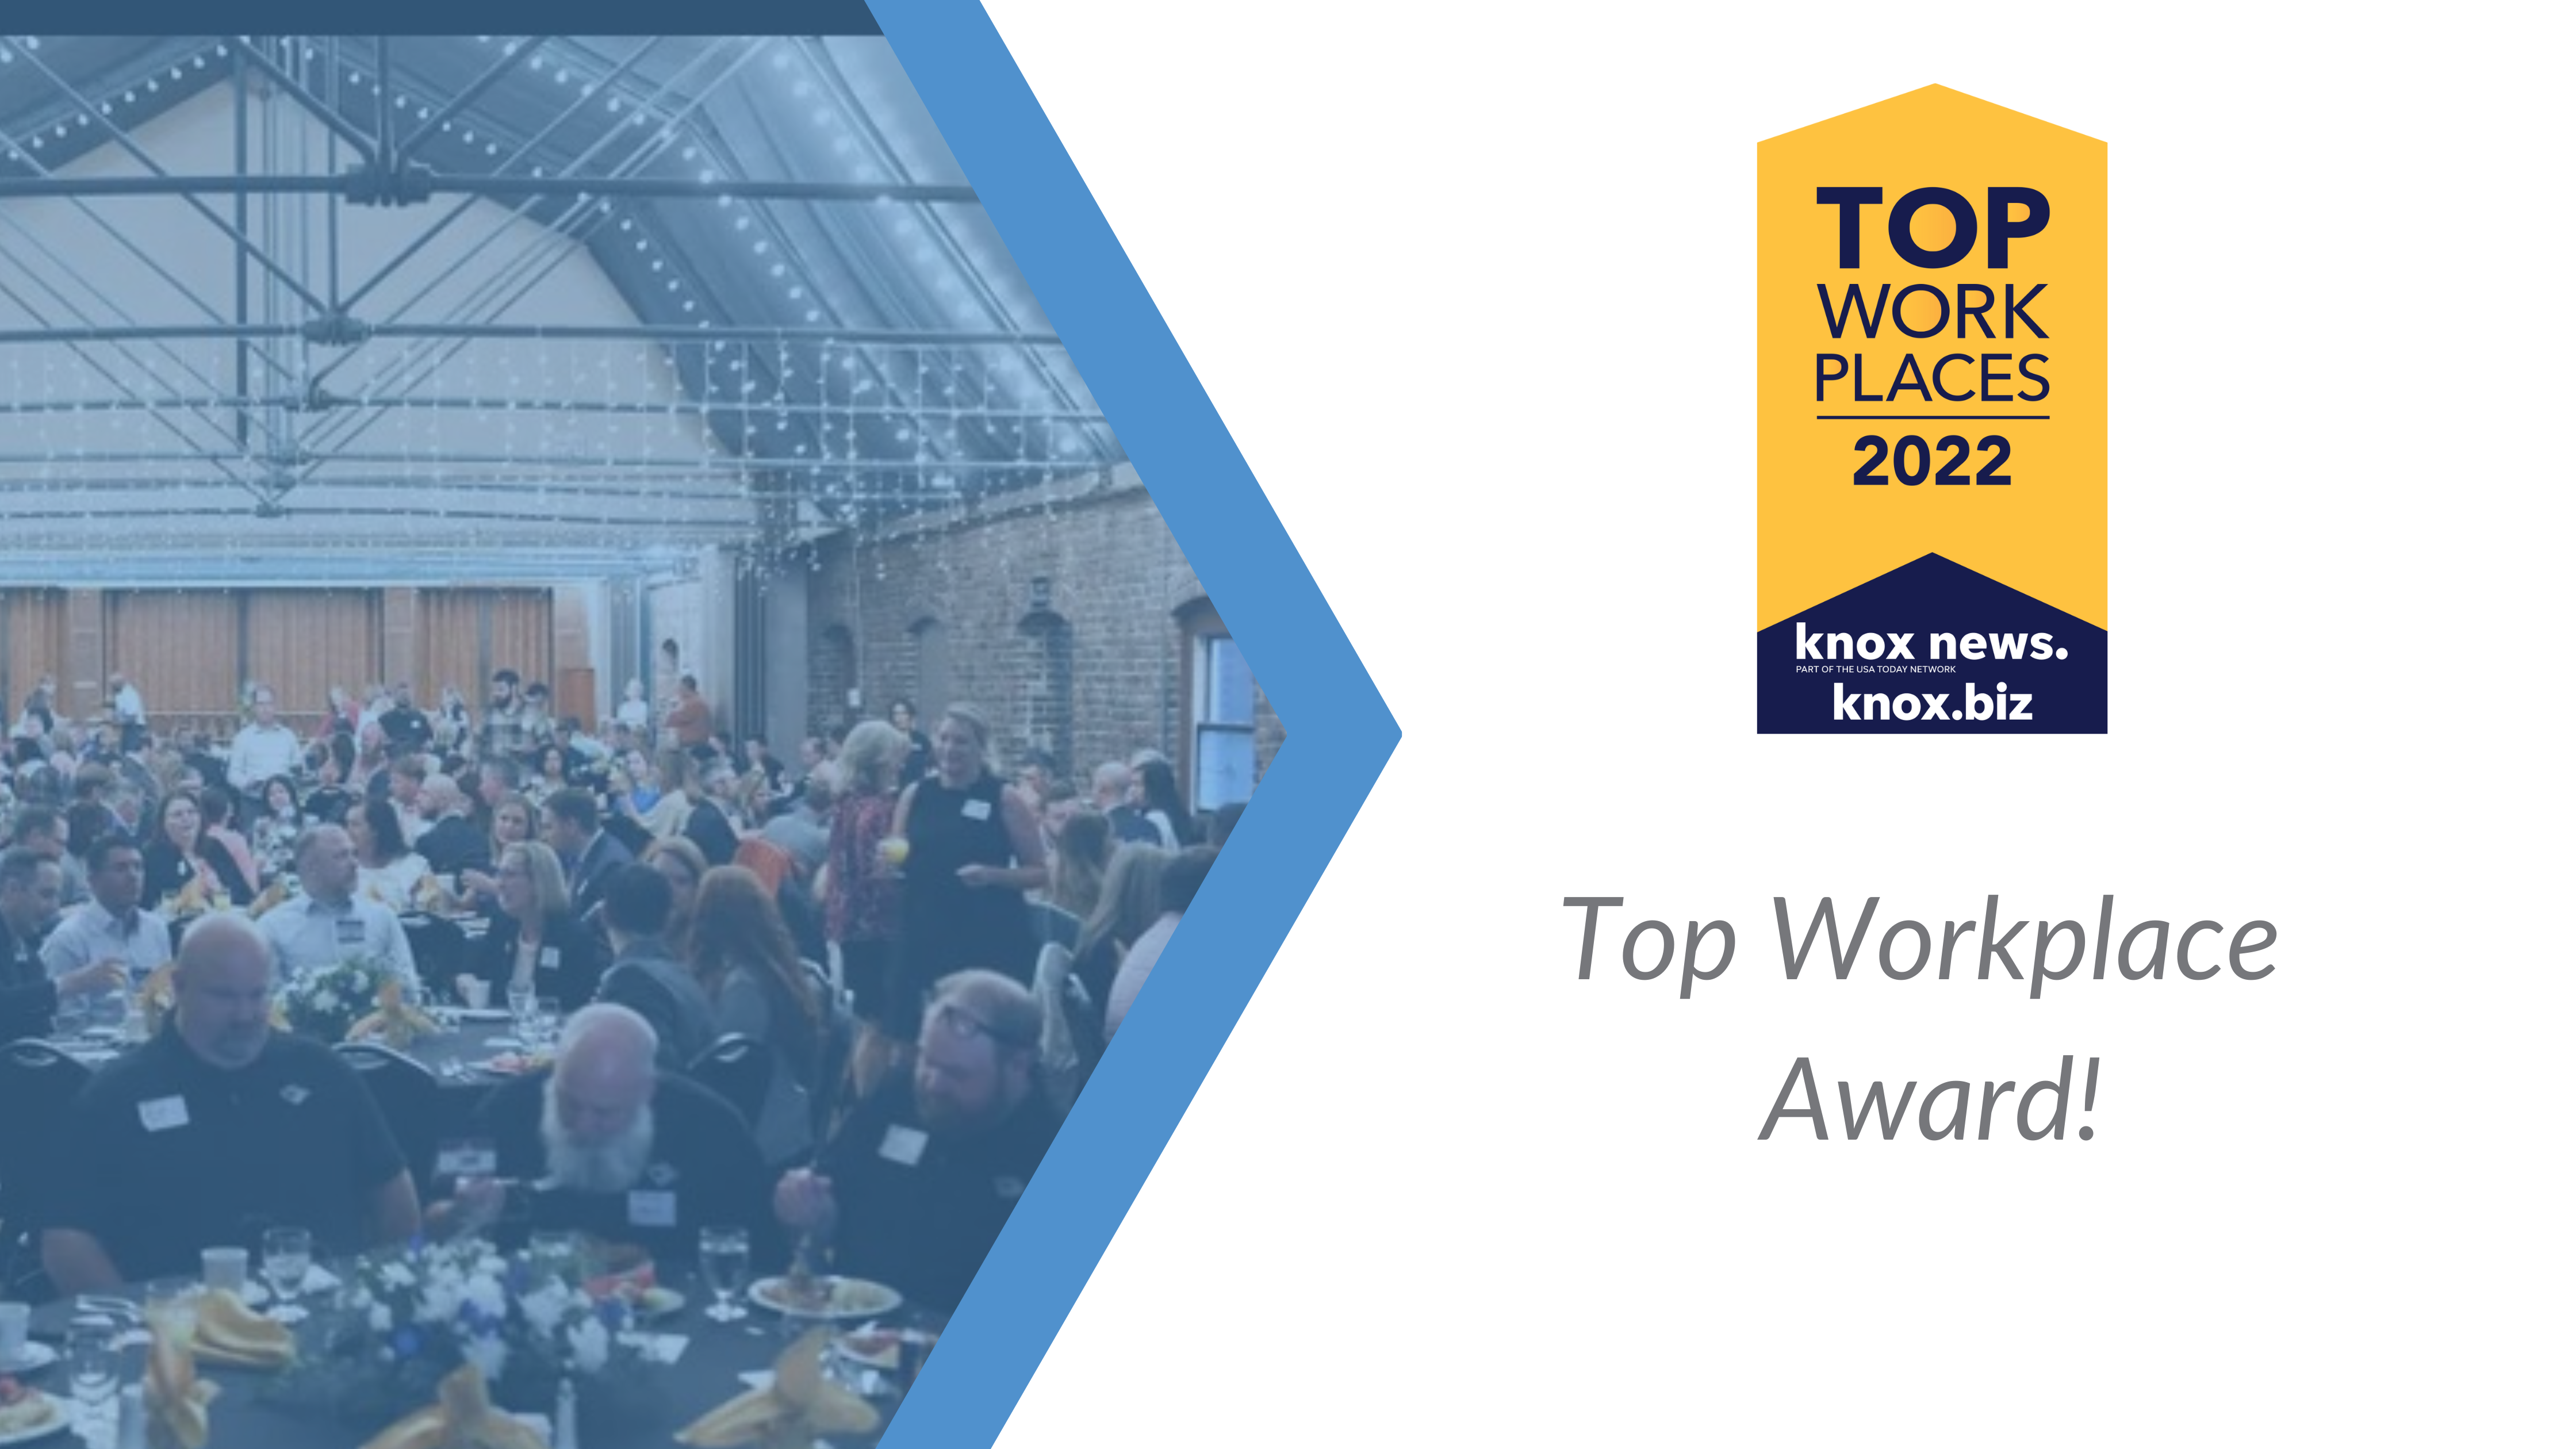 Knoxville News Sentinel – 2022 Top Workplaces Award!